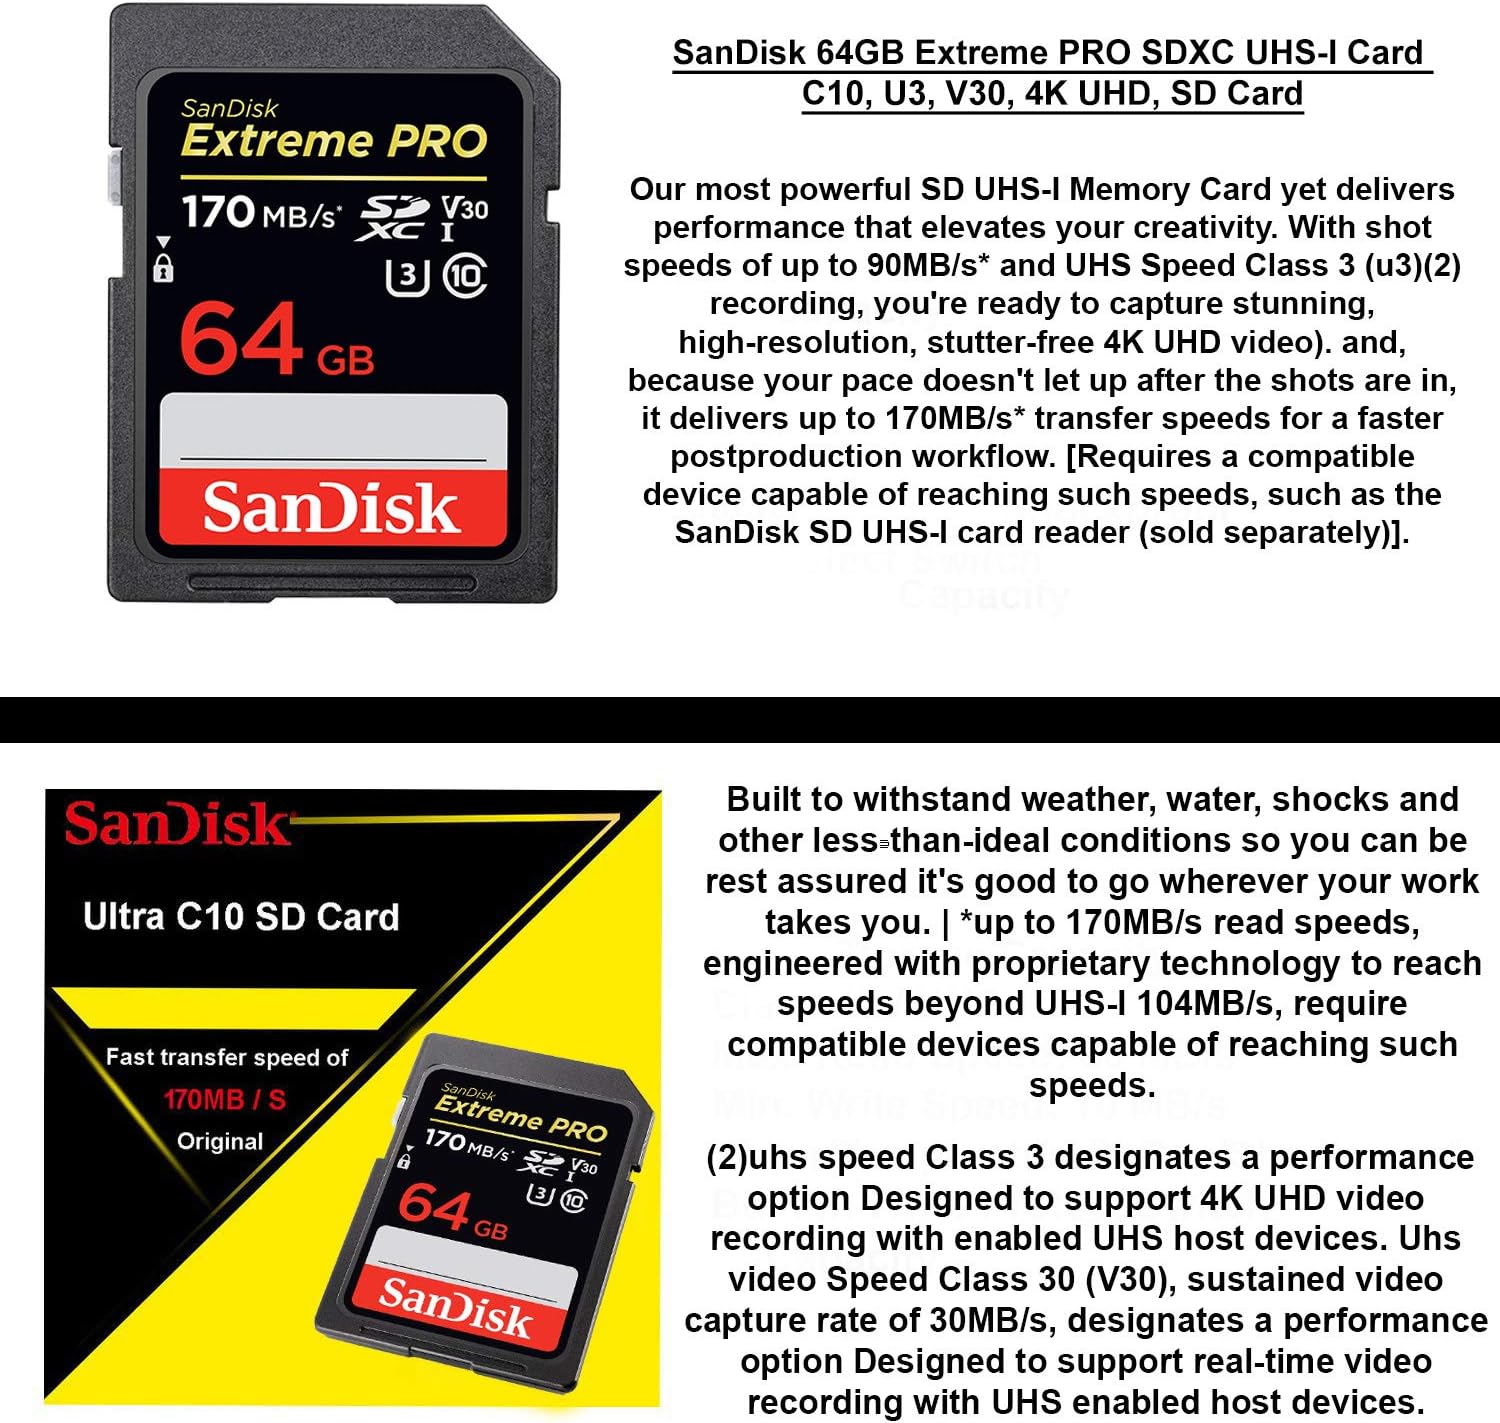 Canon MT-26EX-RT Macro Twin Lite 2398C002 Bundle with 64GB SanDisk Extreme Card